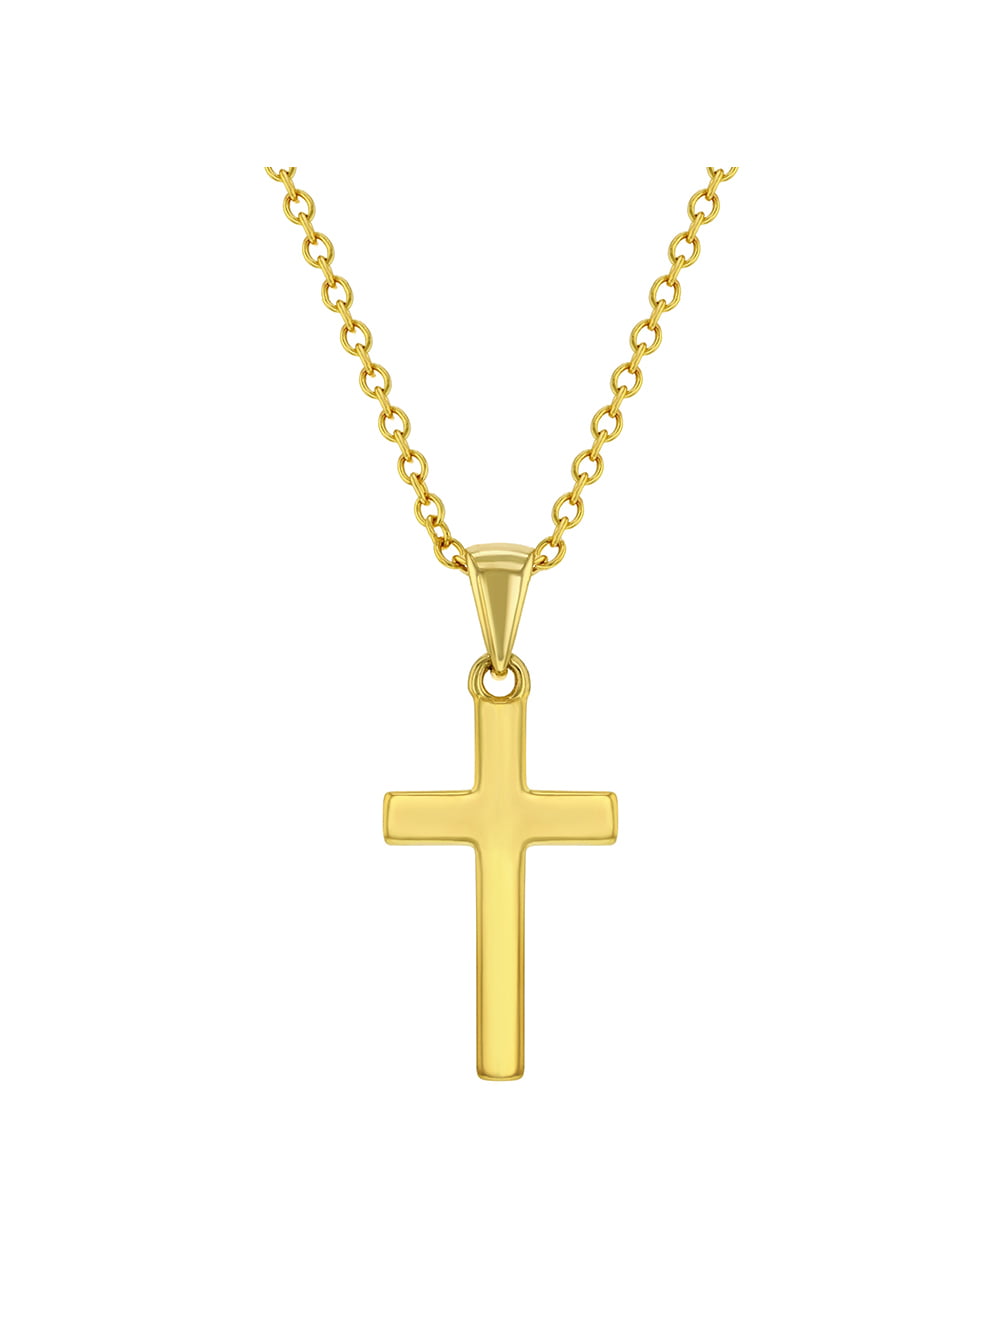 Plain Small Gold Cross tiny Petite 3/8th inch "Best Seller" White or Yellow Gold